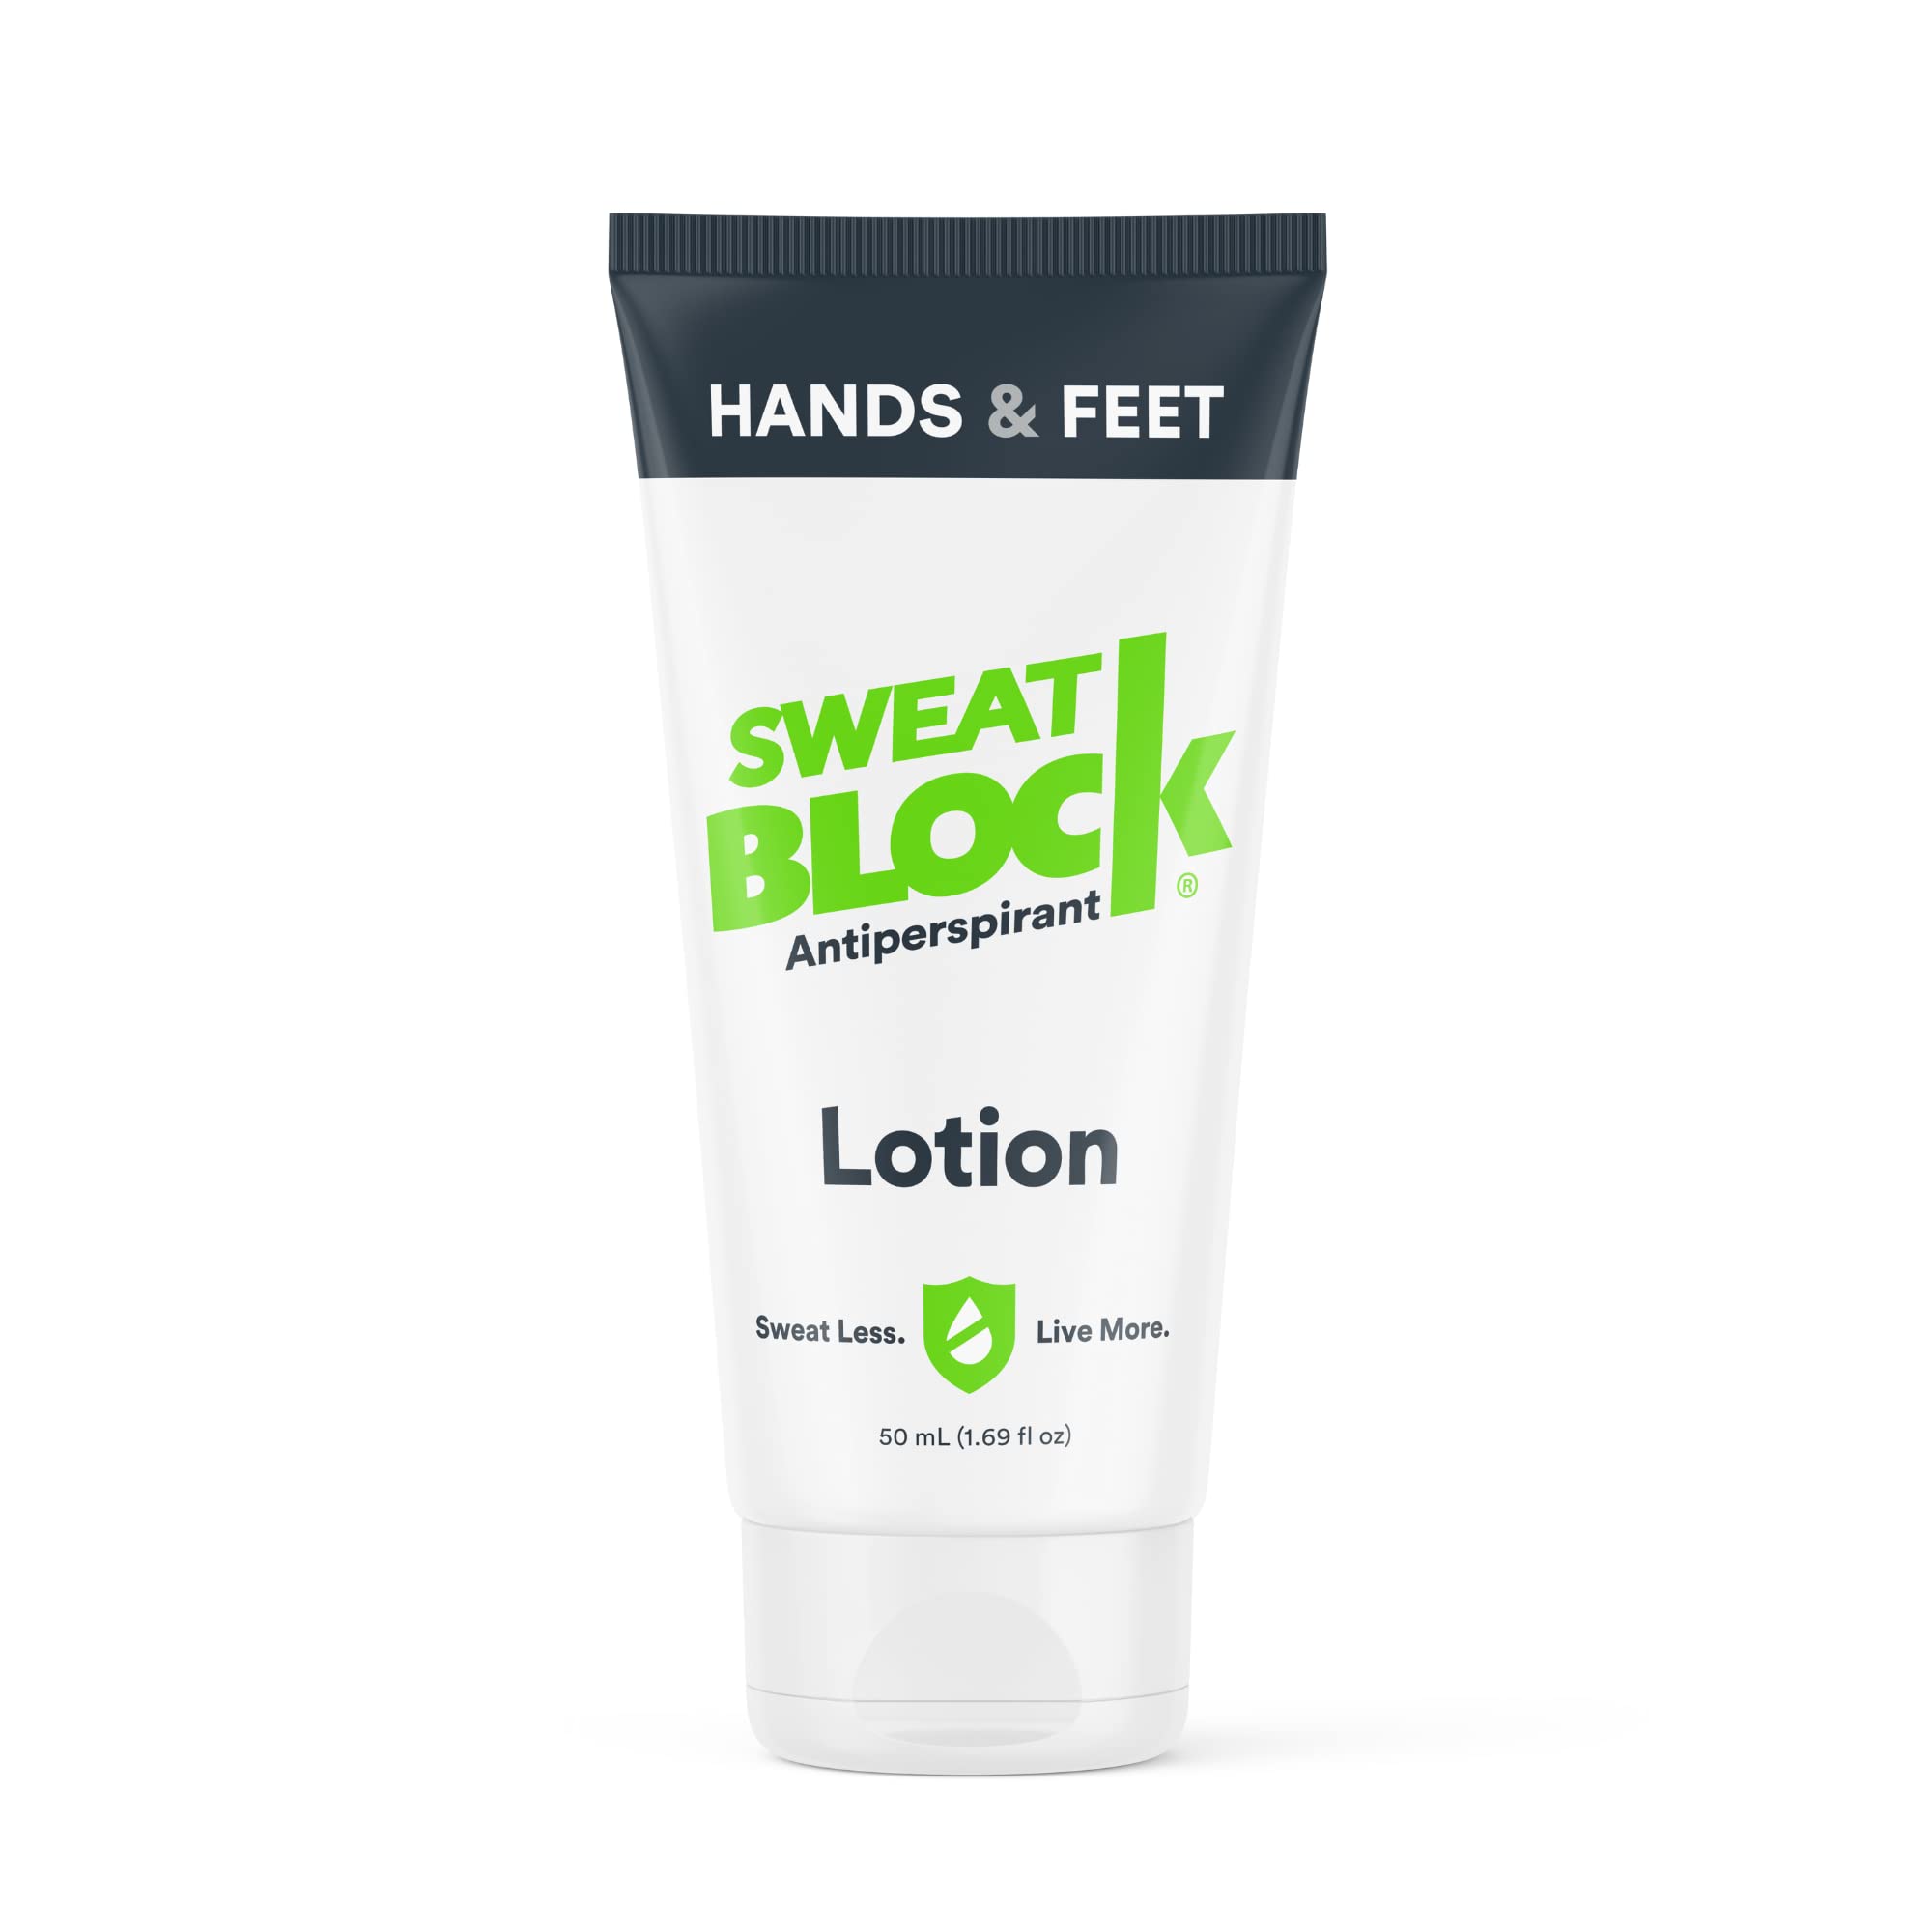 SweatBlock CLINICAL STRENGTH Antiperspirant Lotion for Hands & Feet - Men & Women - Hyperhidrosis Aid to Stop Excessive Sweating - Reduces Foot Odor - Moisturizing with Aloe - Travel Size 1.69 fl oz